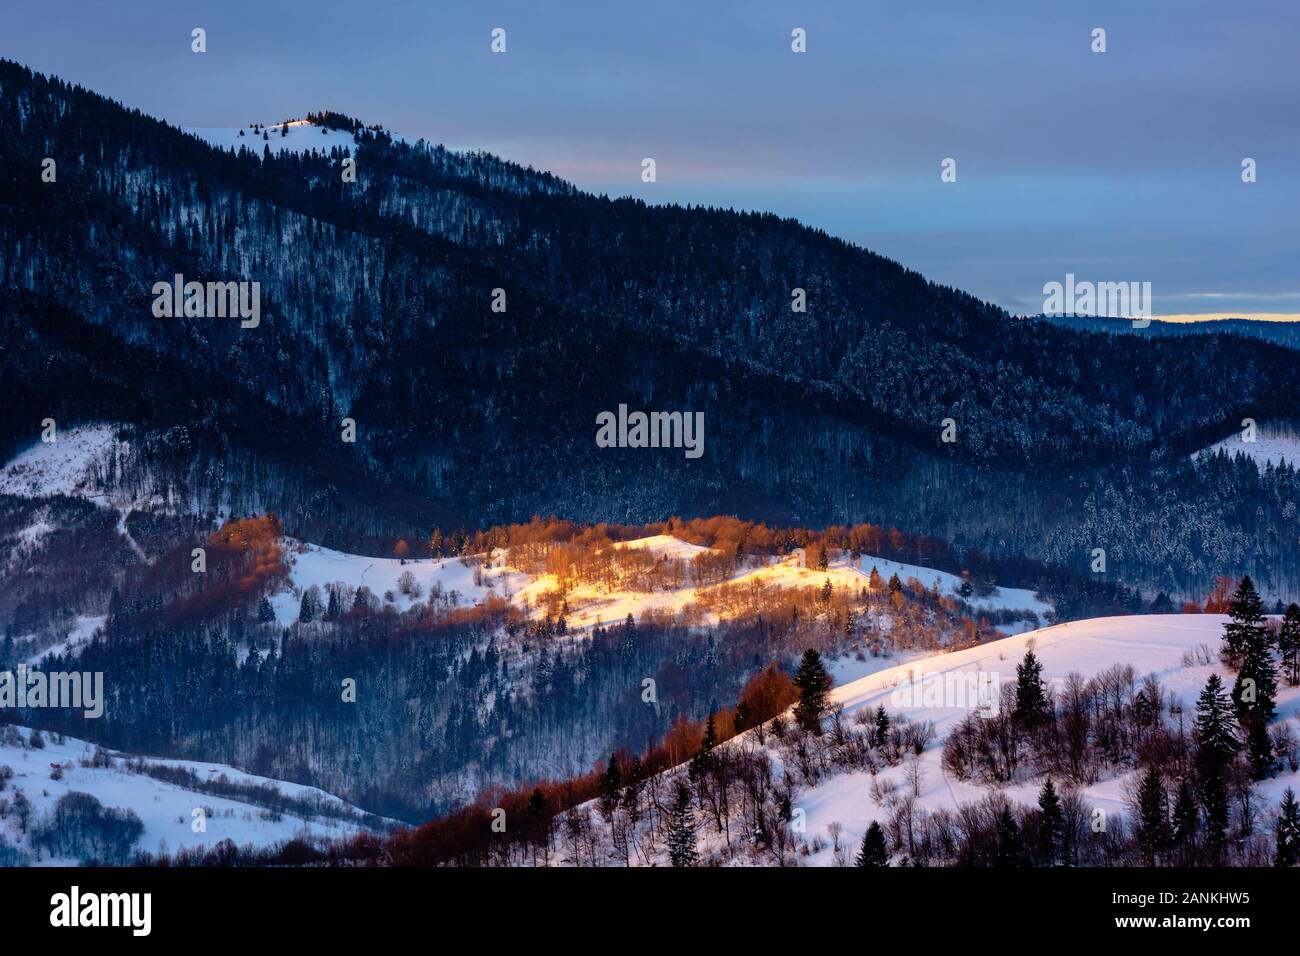 winter countryside scenery at dawn. landscape with spot of first light on snow covered hill. dark coniferous distant forest in shade of the mountain. Stock Photo